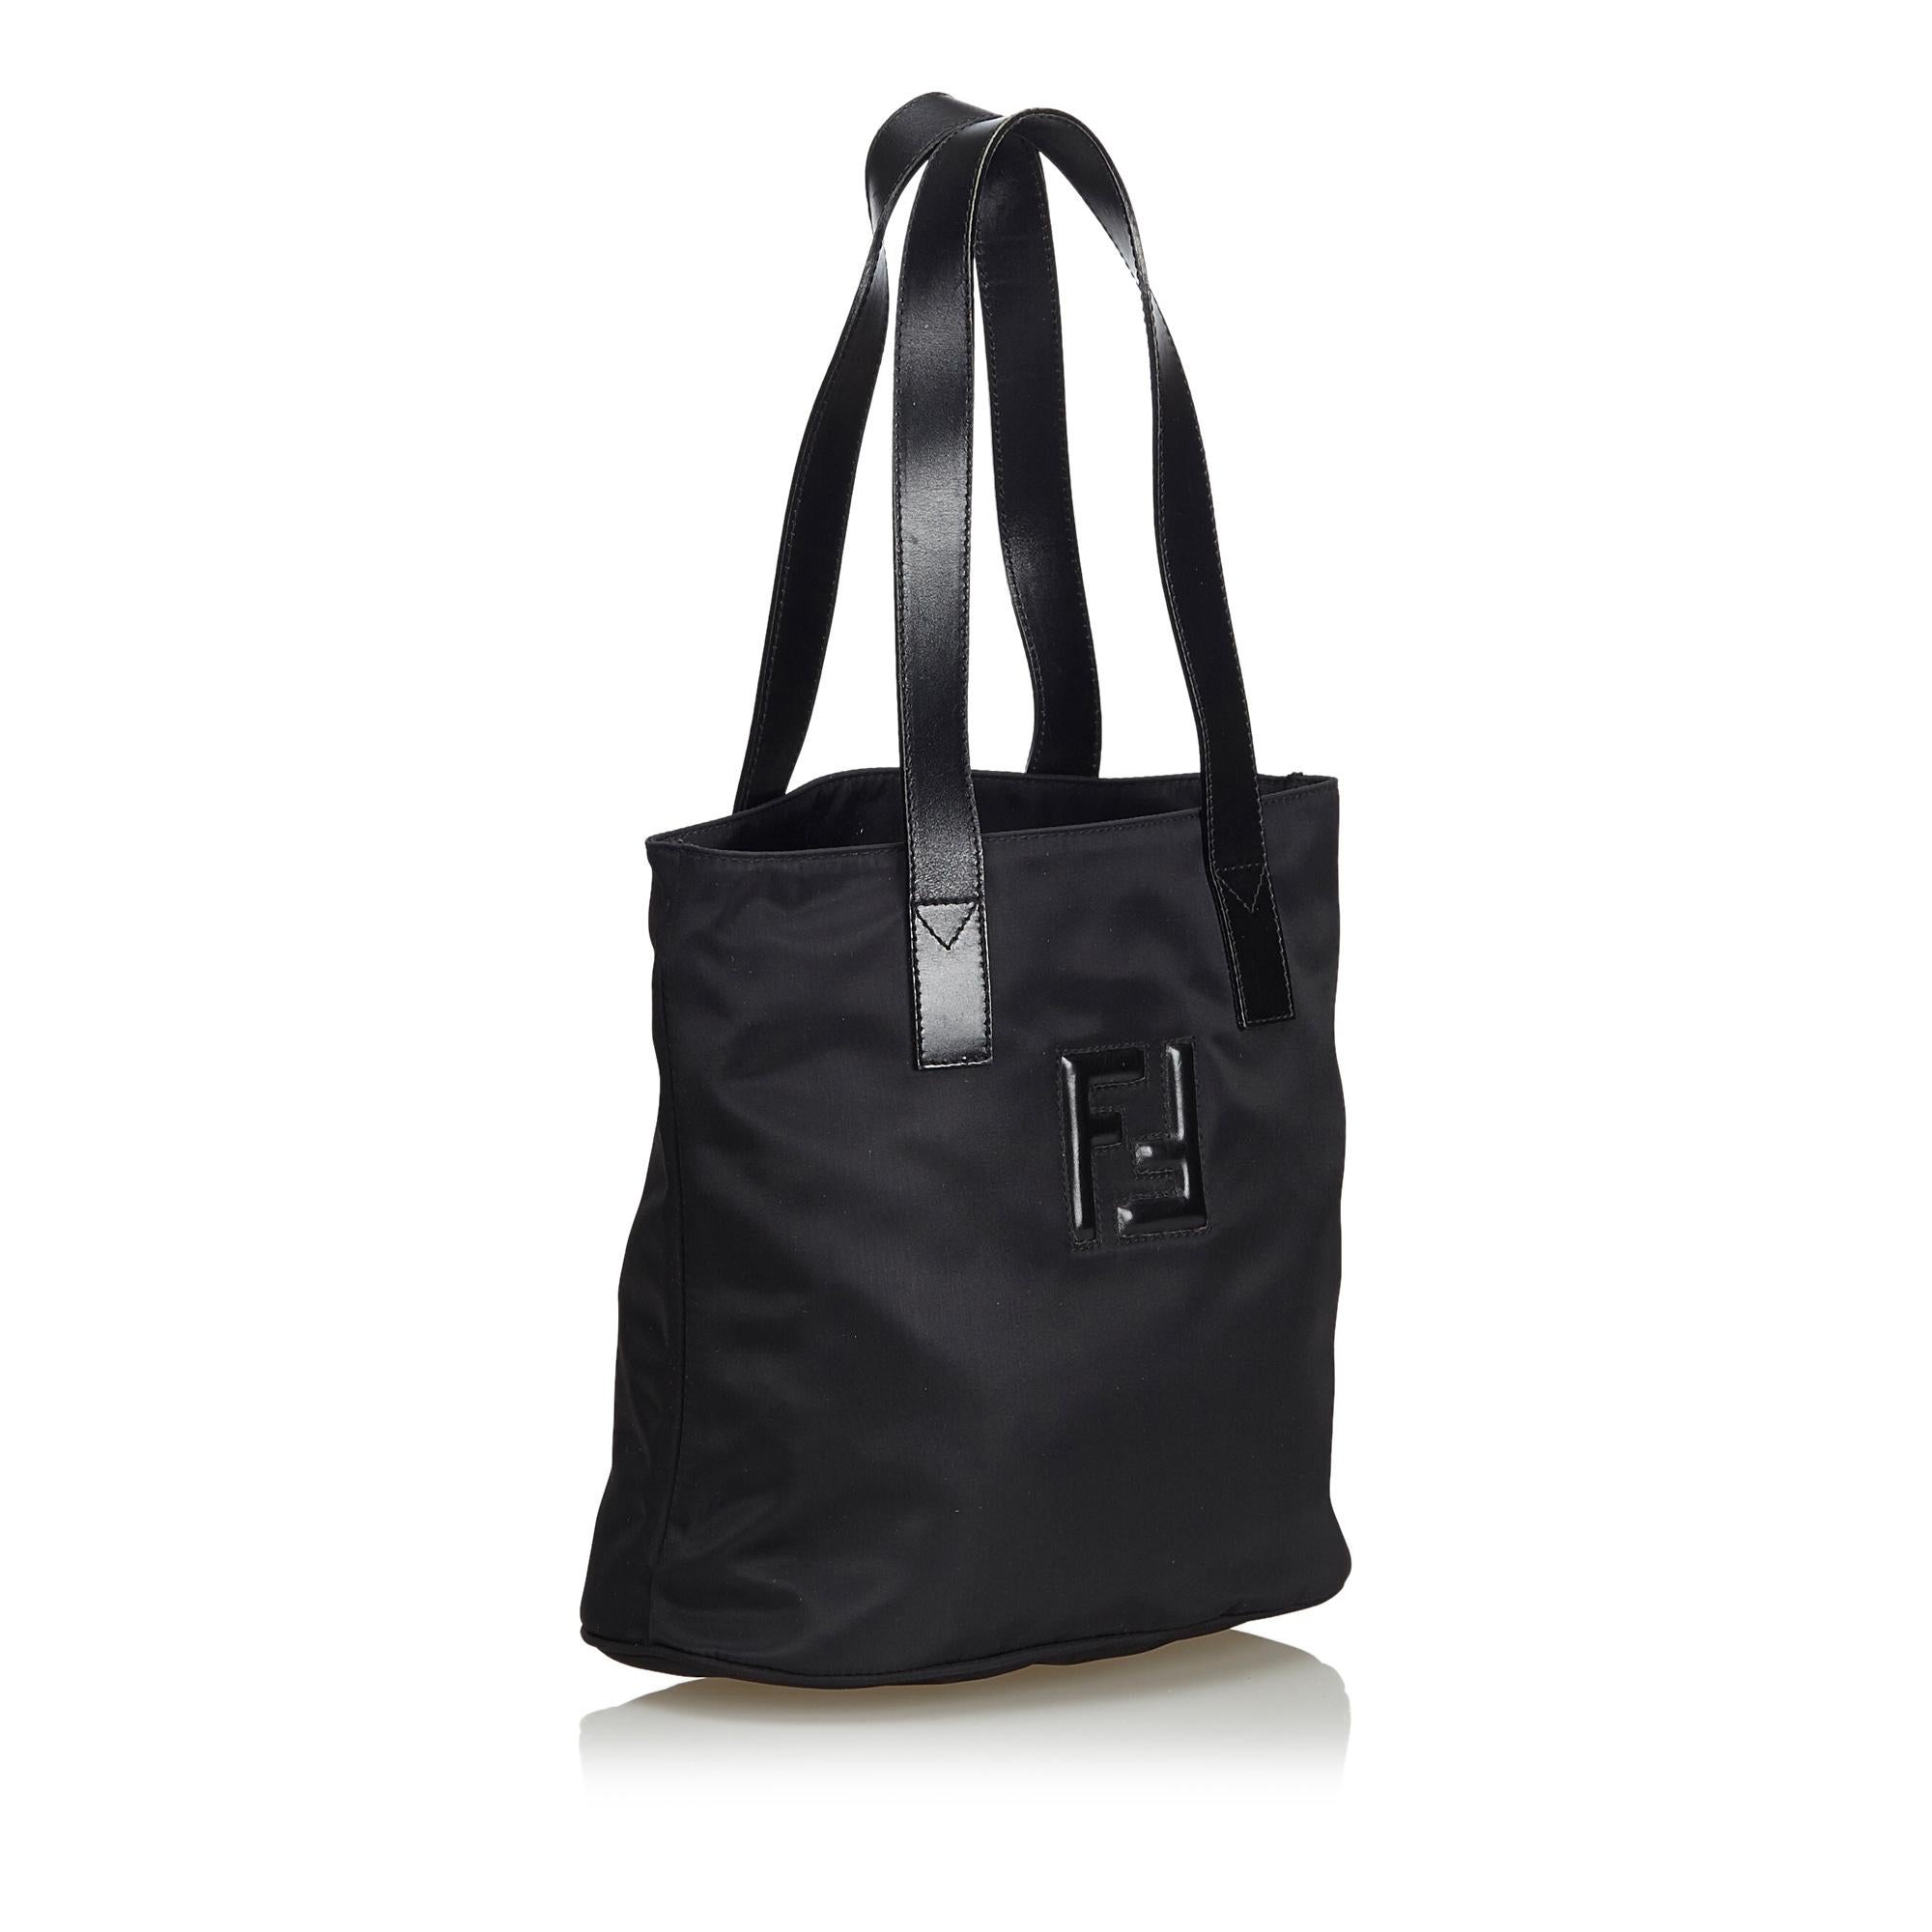 This tote bag features a nylon body, flat leather straps, open top, and interior zip and slip pockets. It carries as AB condition rating.

Inclusions: 
This item does not come with inclusions.

Dimensions:
Length: 26.00 cm
Width: 30.00 cm
Depth: